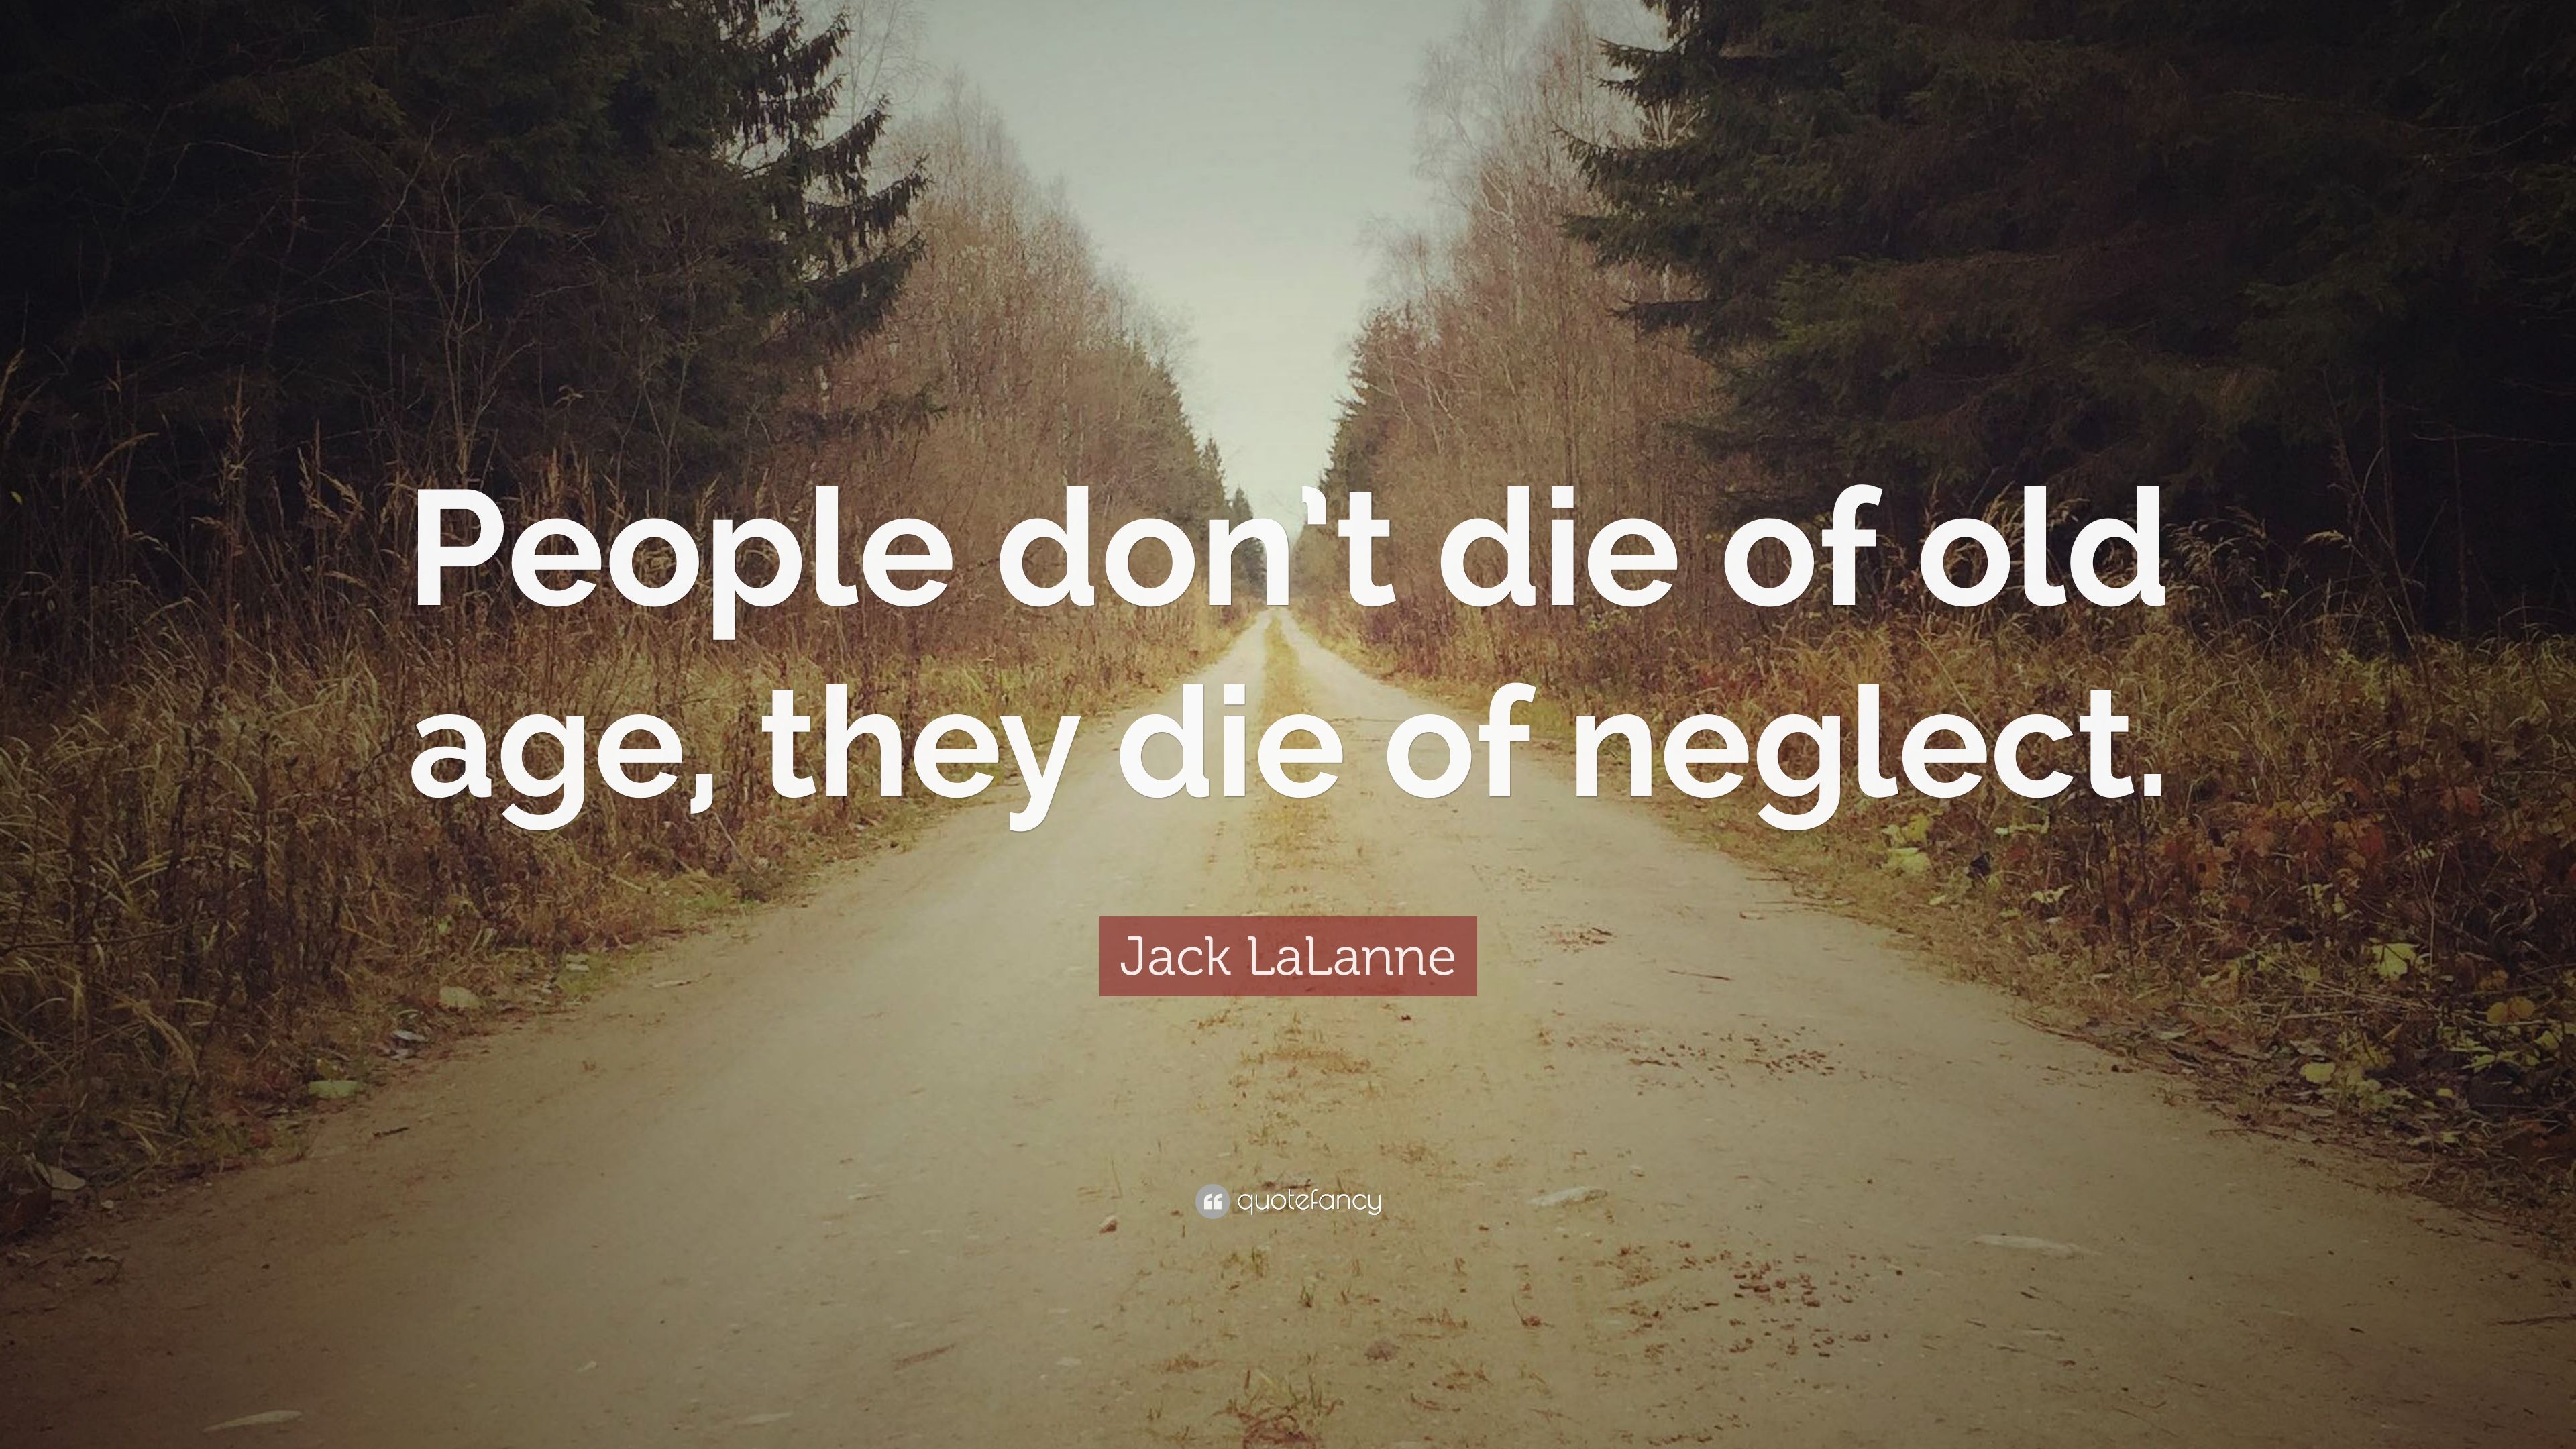 Jack LaLanne Quote: “People don't die of old age, they die of neglect.” (7 wallpaper)